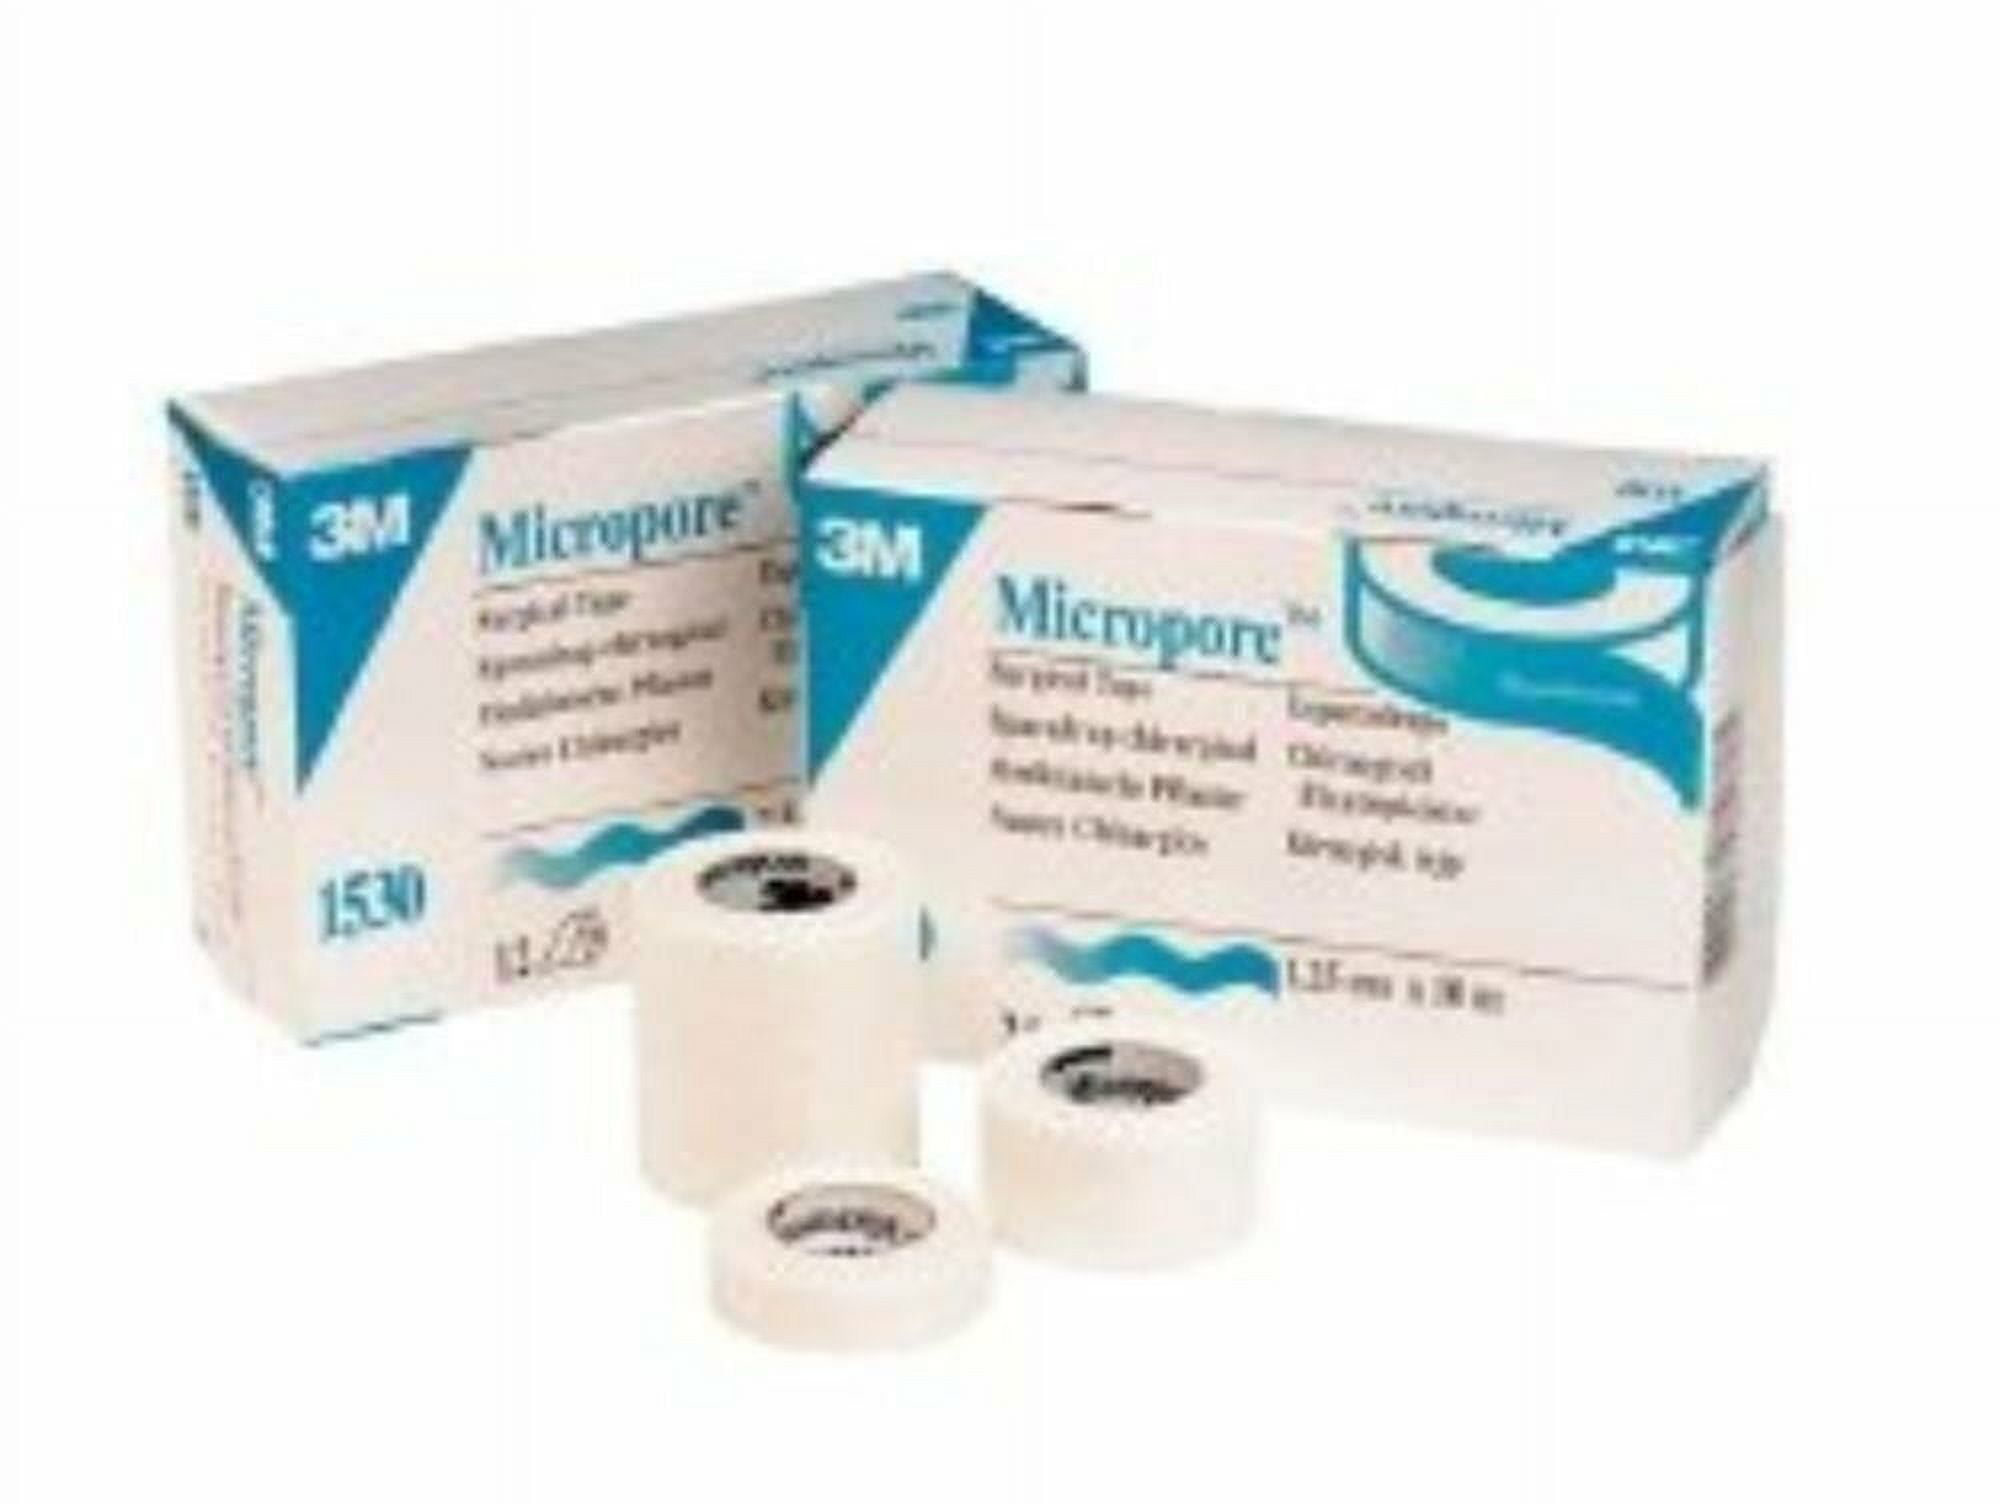 Micropore Surgical Medical Tape, 3 Inch X 10 Yards, Paper, 3M 1530-3, White  - Each